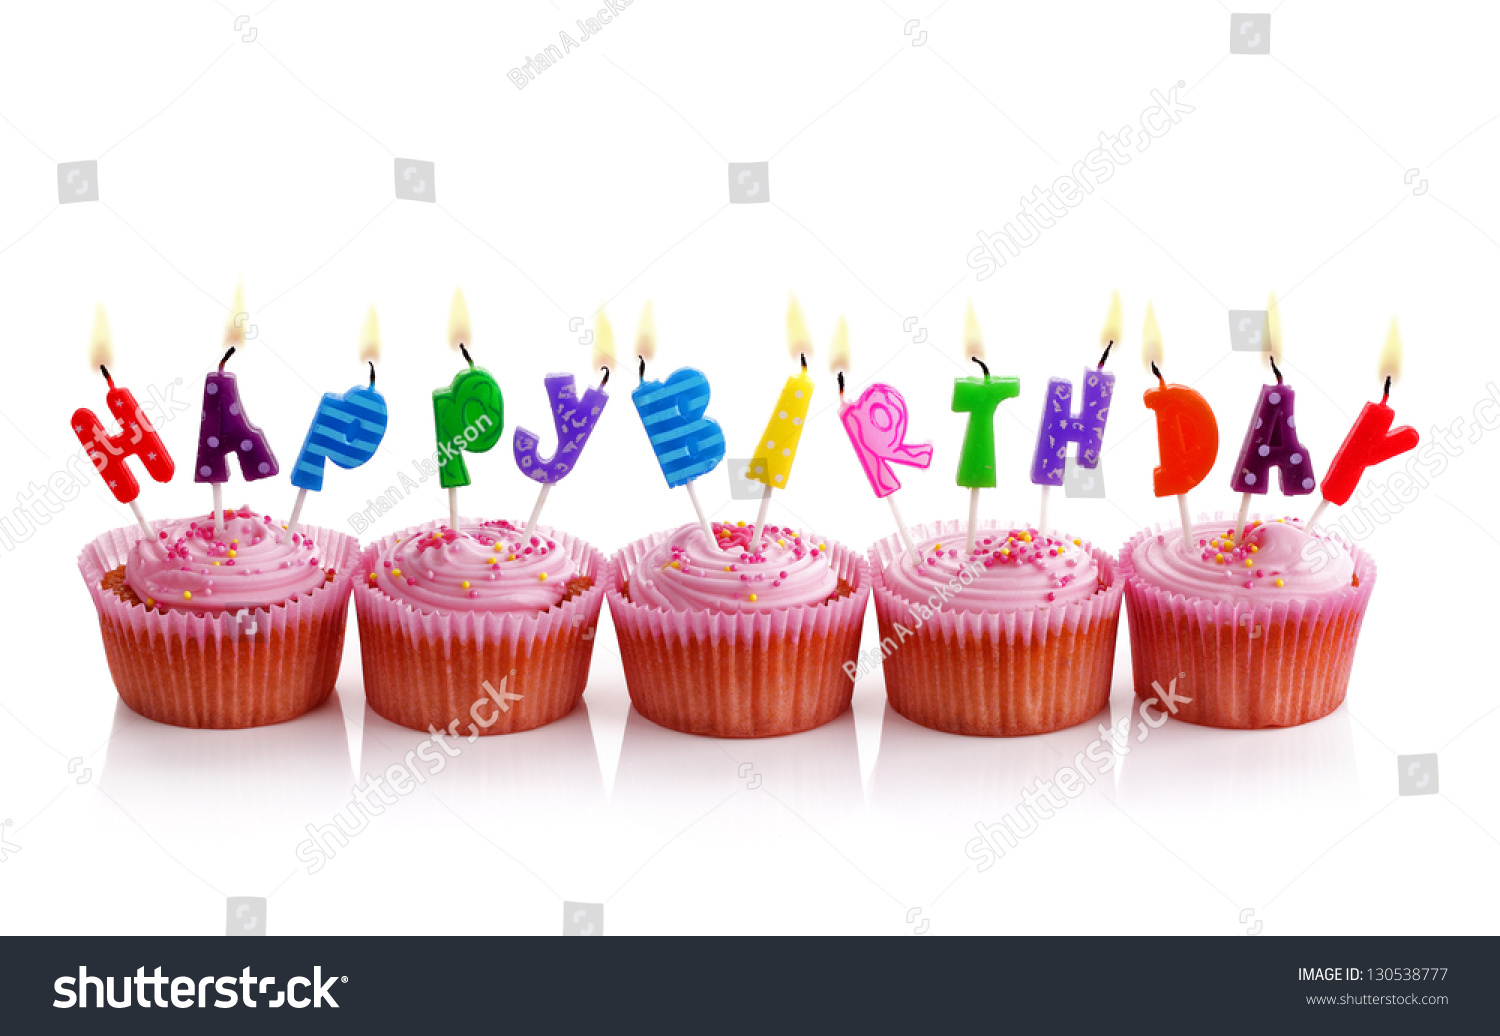 Happy Birthday Candles On Pink Cupcakes Isolated On White Stock Photo ...